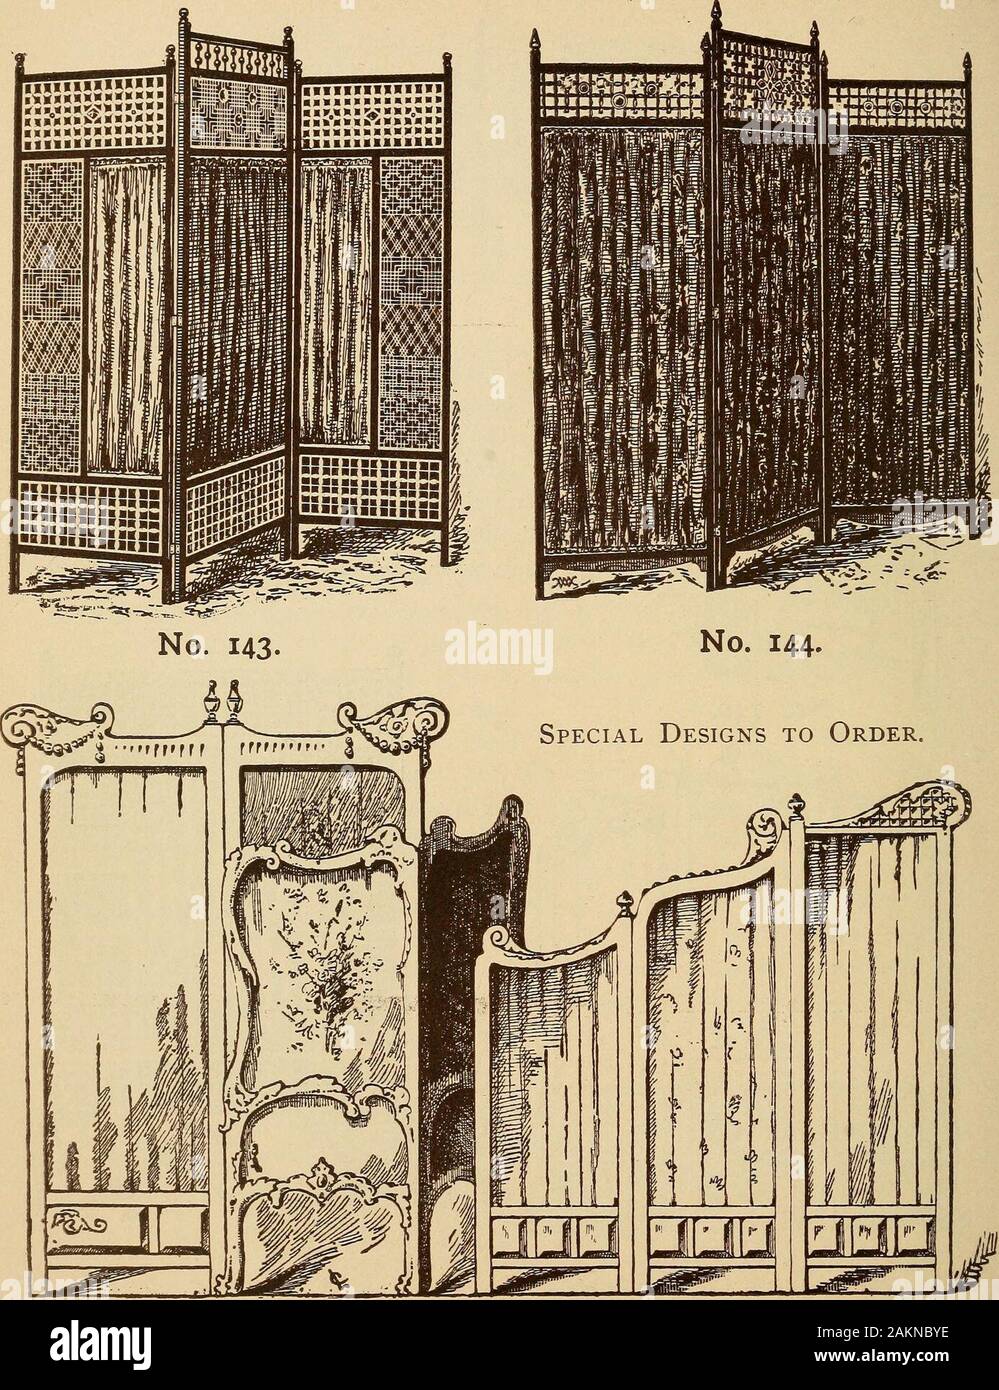 Our doors and windows : how to decorate them . No. 141. Dining Room or Library Screen. No. 142. Fire Screen.. No. 145. No. 146. No. 147. THE PURPOSES OF MODERN ARCHITECTURE. Stock Photo